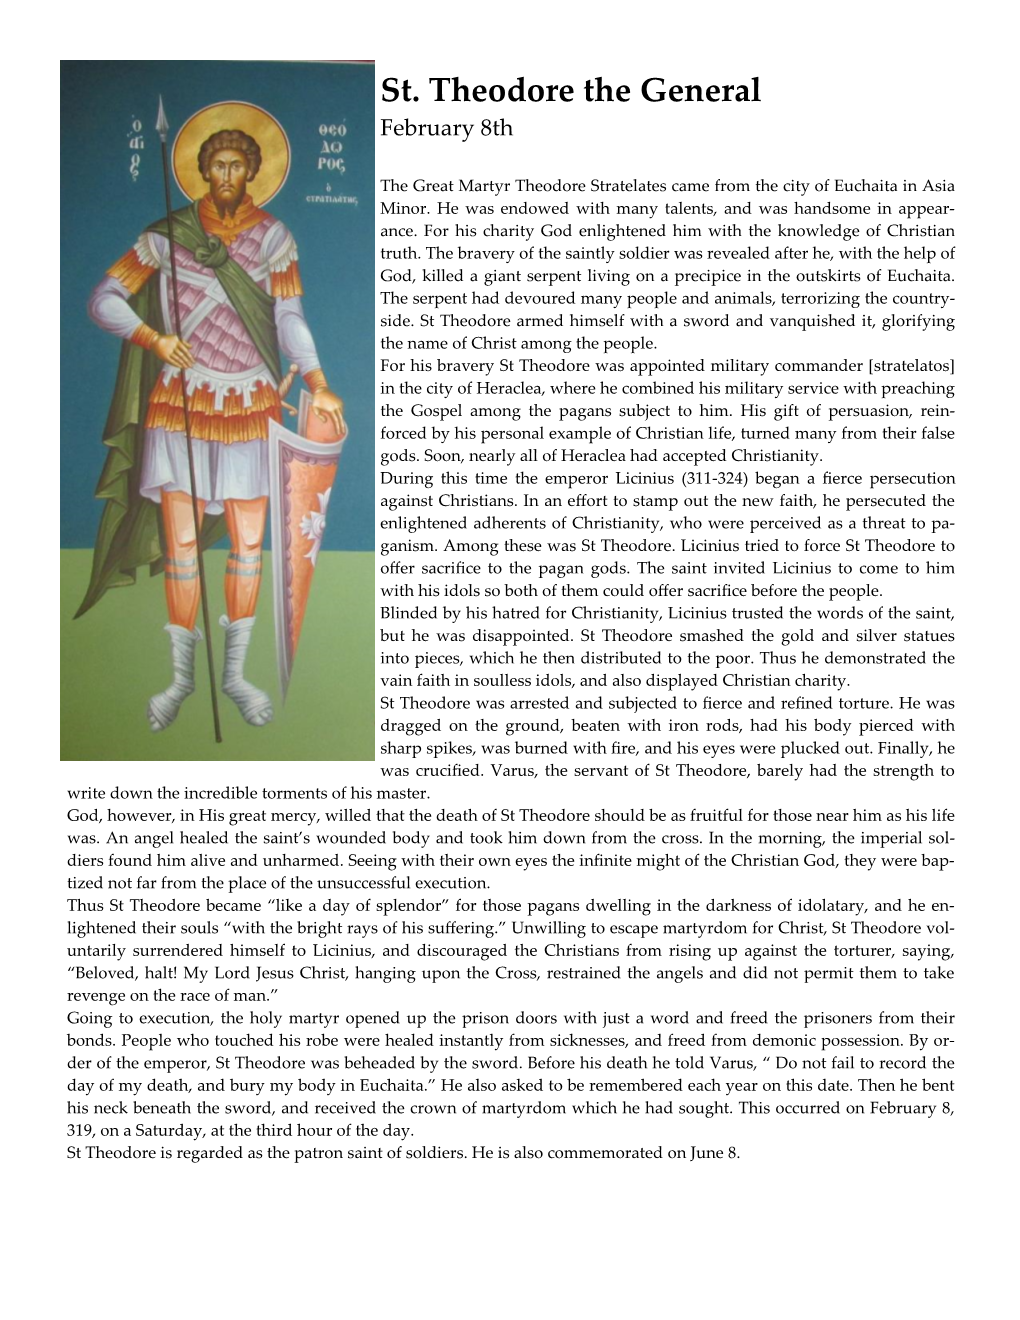 St. Theodore the General February 8Th